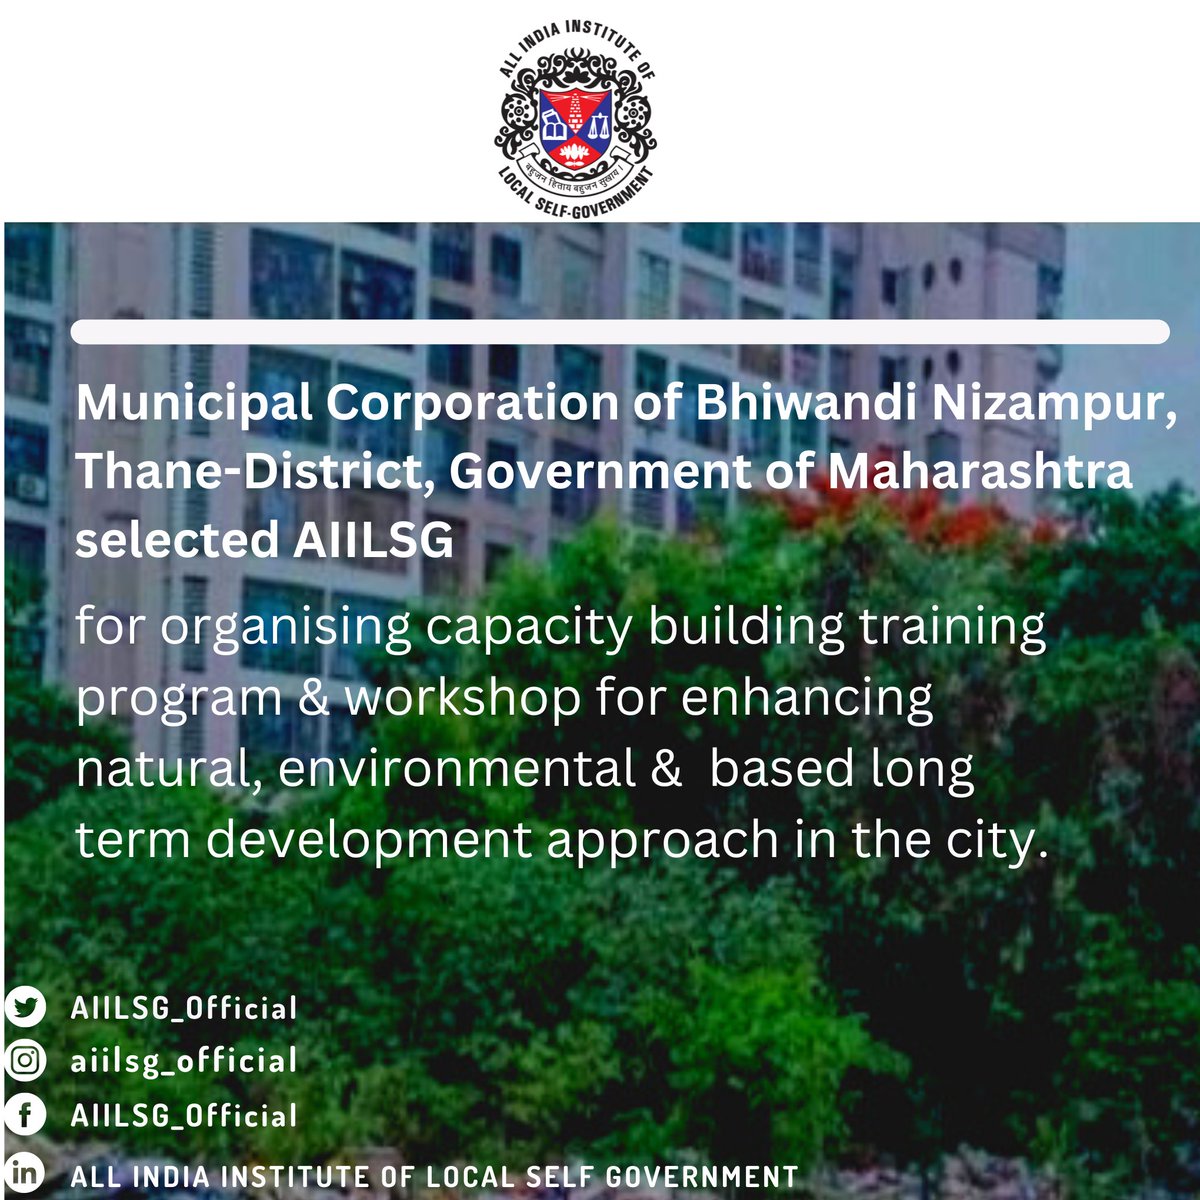 #MUNICIPAL Corporation of #BhiwandiNizampur, #Thane-District, #Government of #Maharashtra selected AIILSG-New-Delhi for organising capacity building training program & workshop for enhancing #natural, #environmental & based #longterm #development approach in the city.